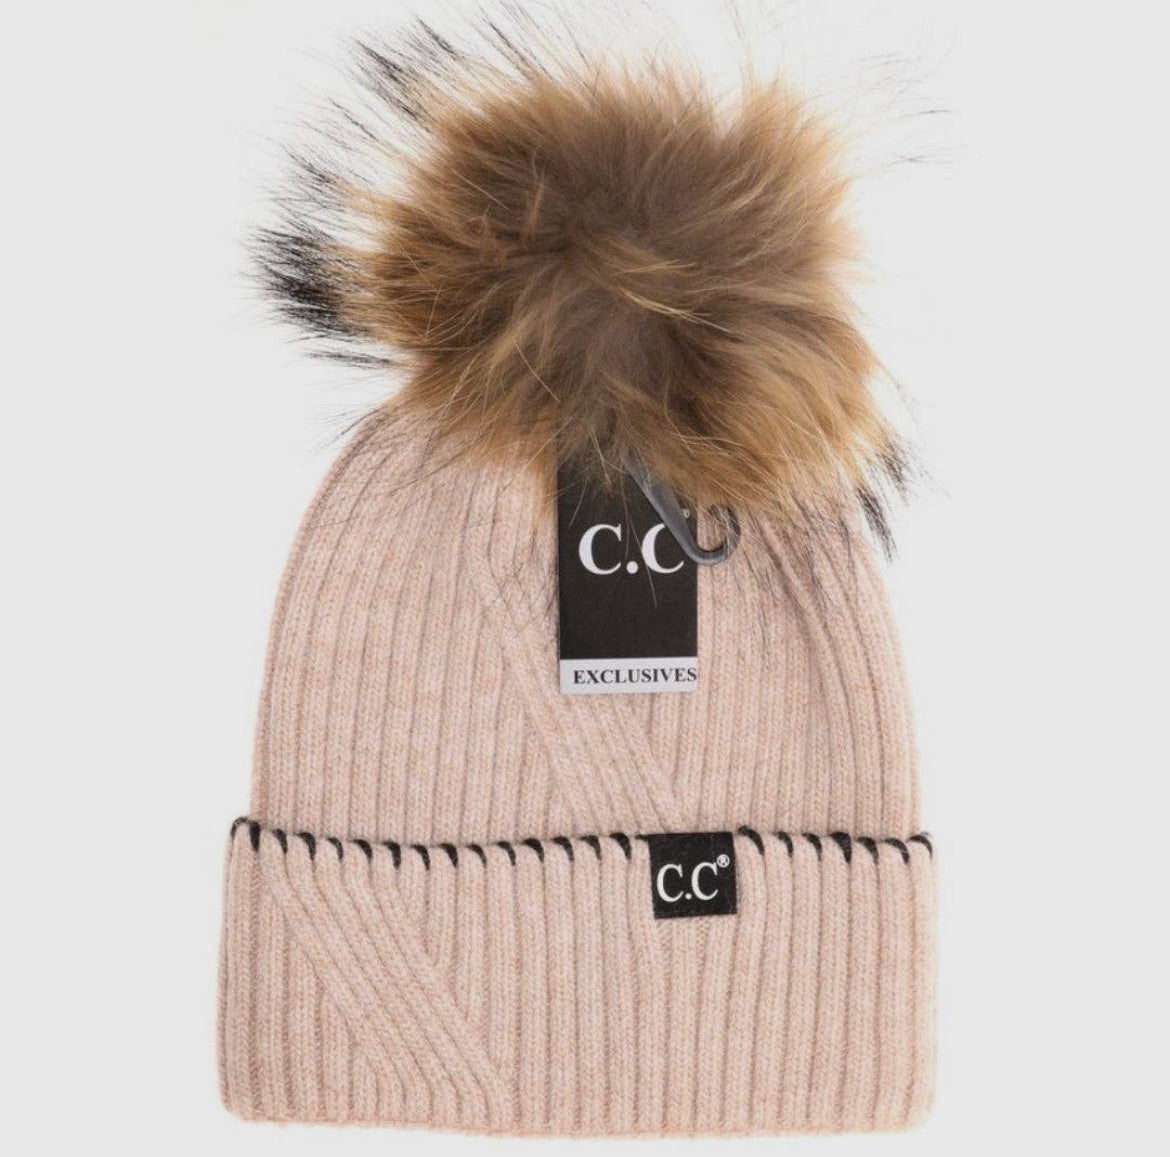 CC Exclusive - Black Label Special Edition Ribbed Cuff Beanie